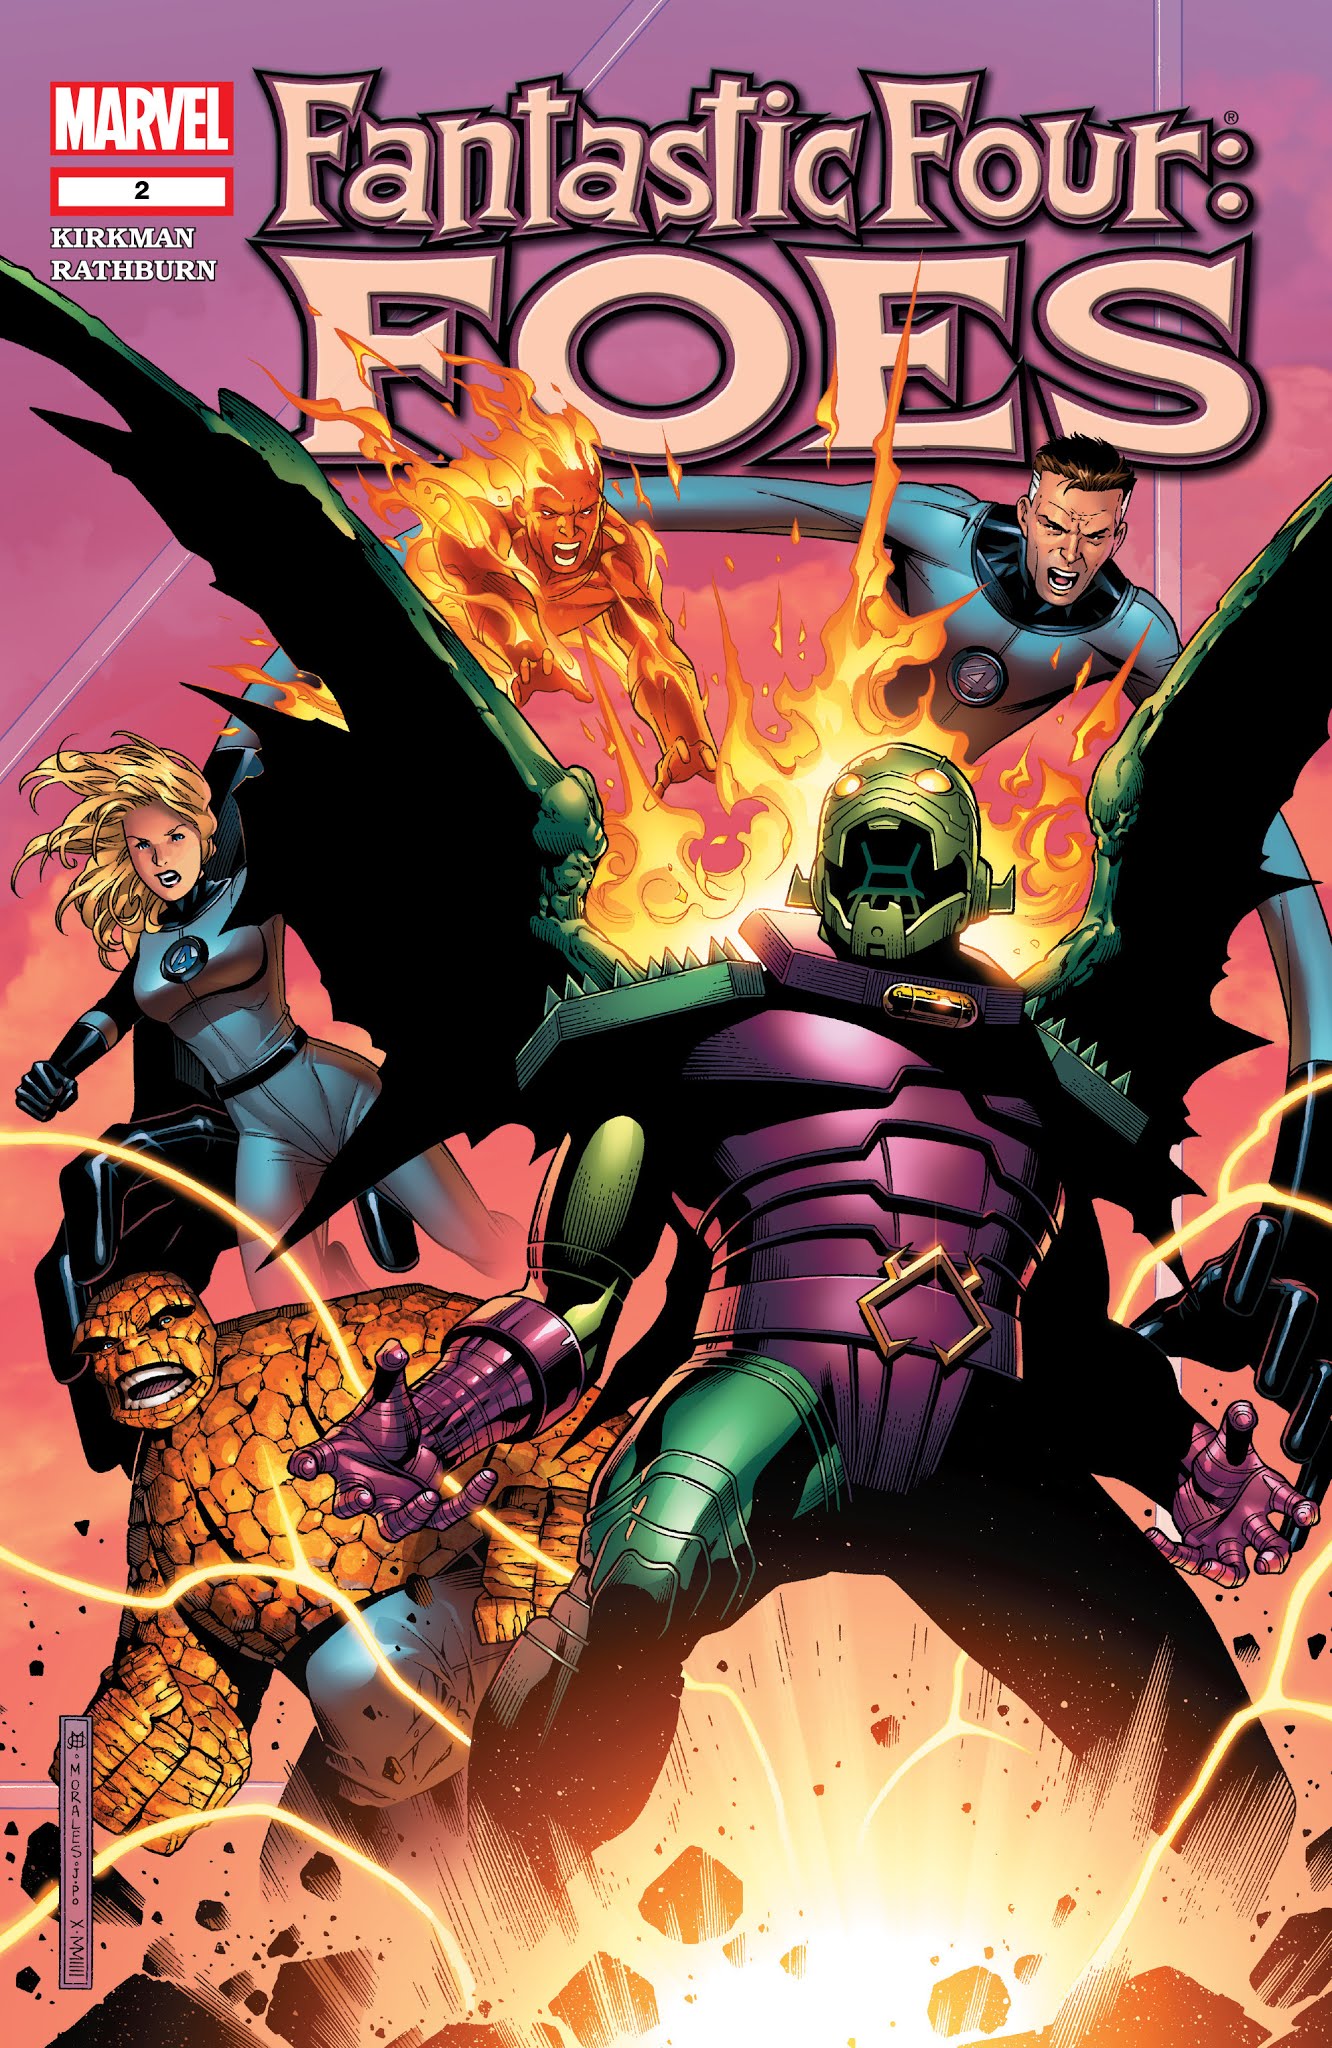 Read online Fantastic Four: Foes comic -  Issue #2 - 1